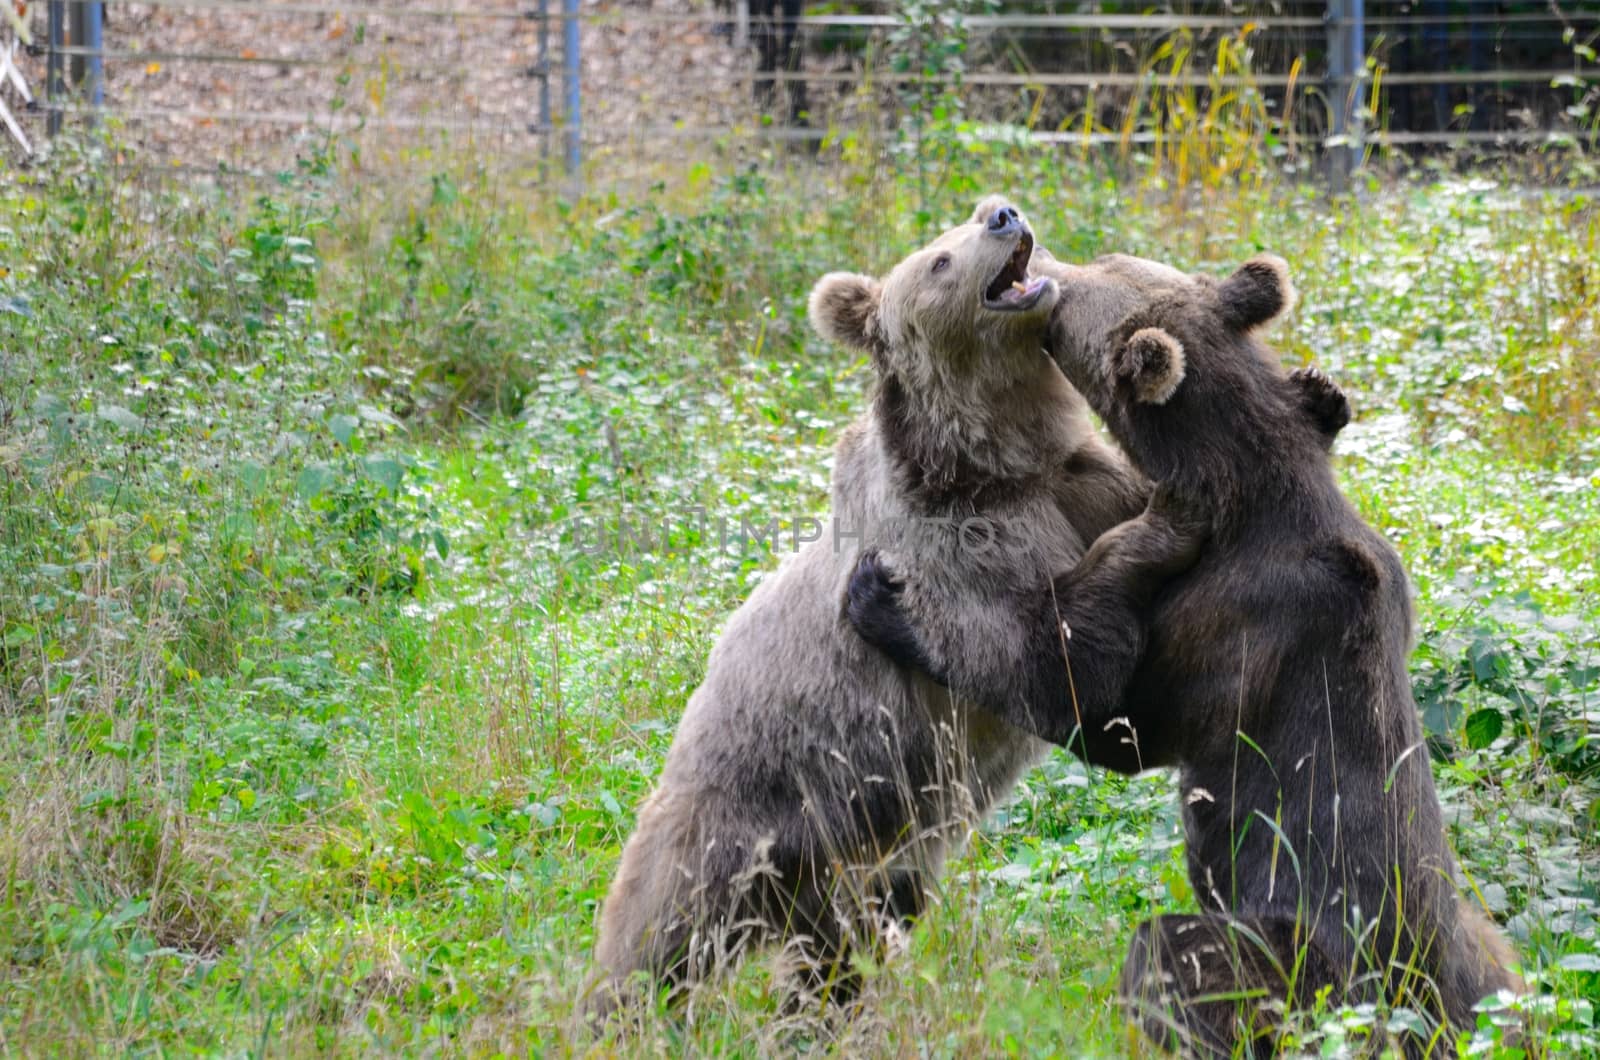 Two brown bears in Wroclaw's ZOO, Poland. Animals wrestling and playing together.